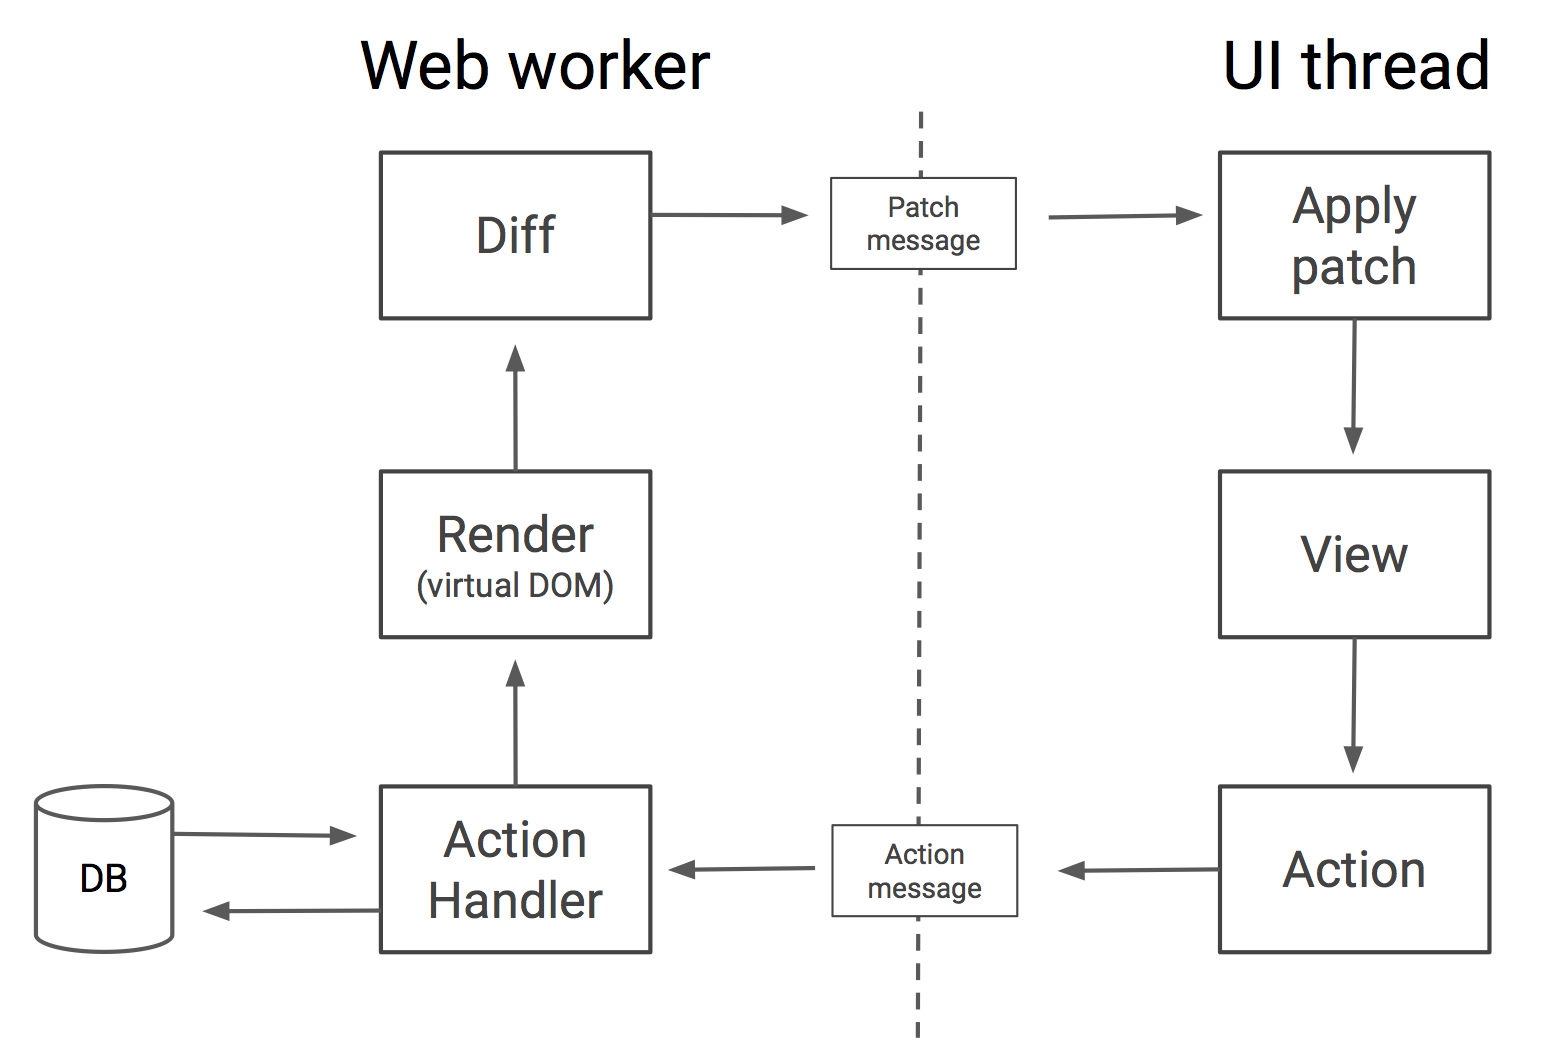 Diagram showing the web worker handling the actions, rendering virtual dom, and diffing, and the UI thread handling applying the patch, generating the view, and dispatching an action